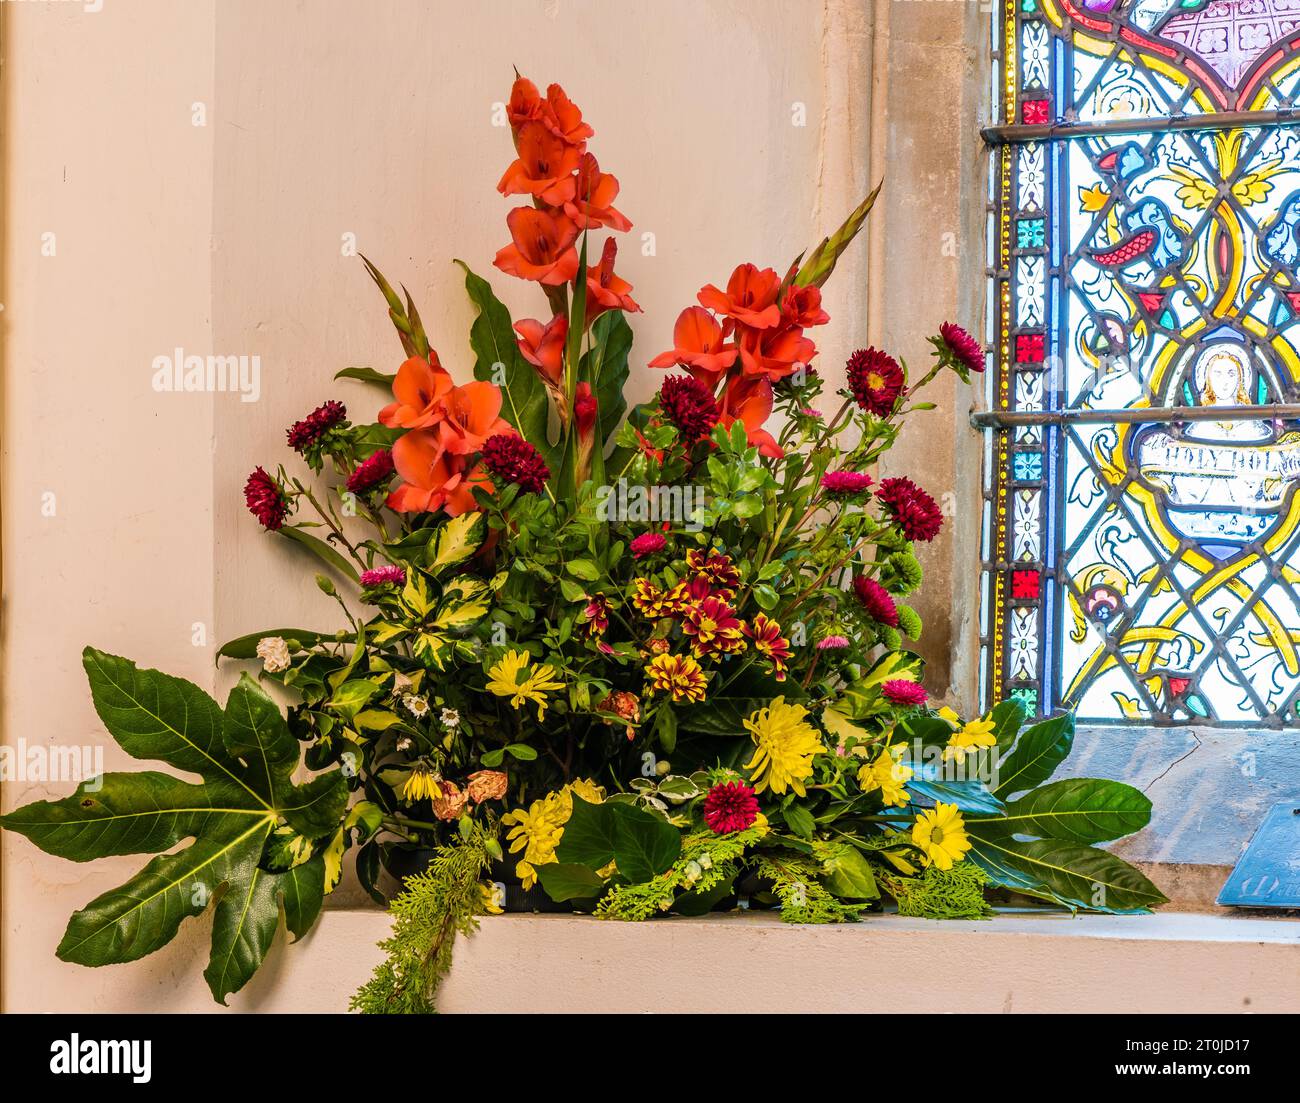 Harvest Festival 2023  at All Saints Church, East Budleigh. Stock Photo